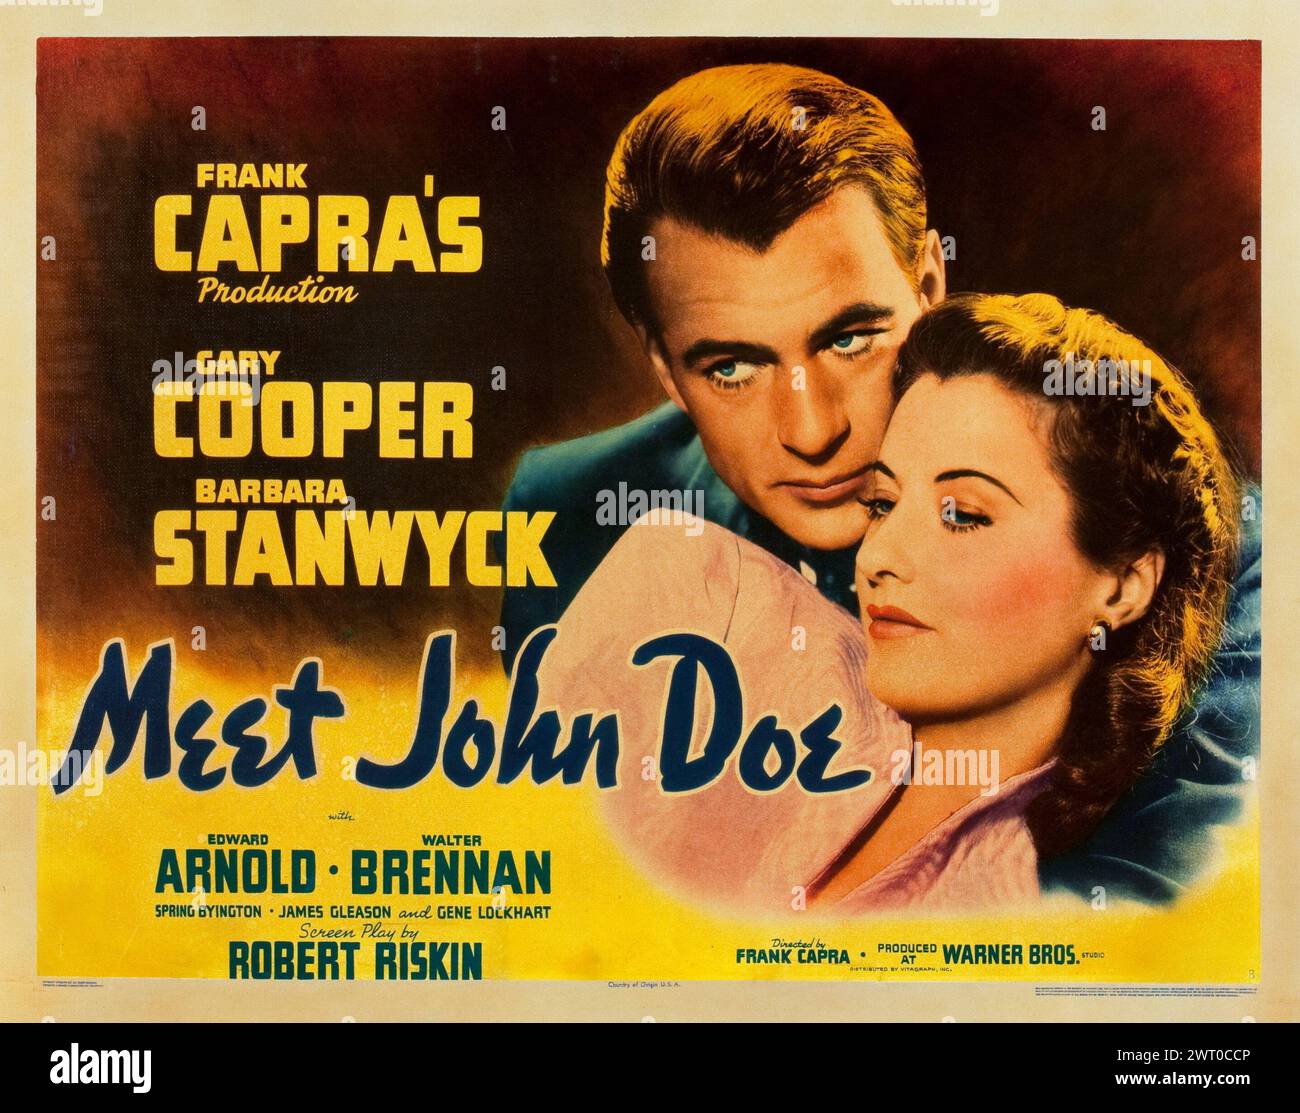 Frank Capra's Meet John Doe (Warner Brothers, 1941). Vintage film poster. Style B featuring 1940s movie stars Gary Cooper and Barbara Stanwyck Stock Photo